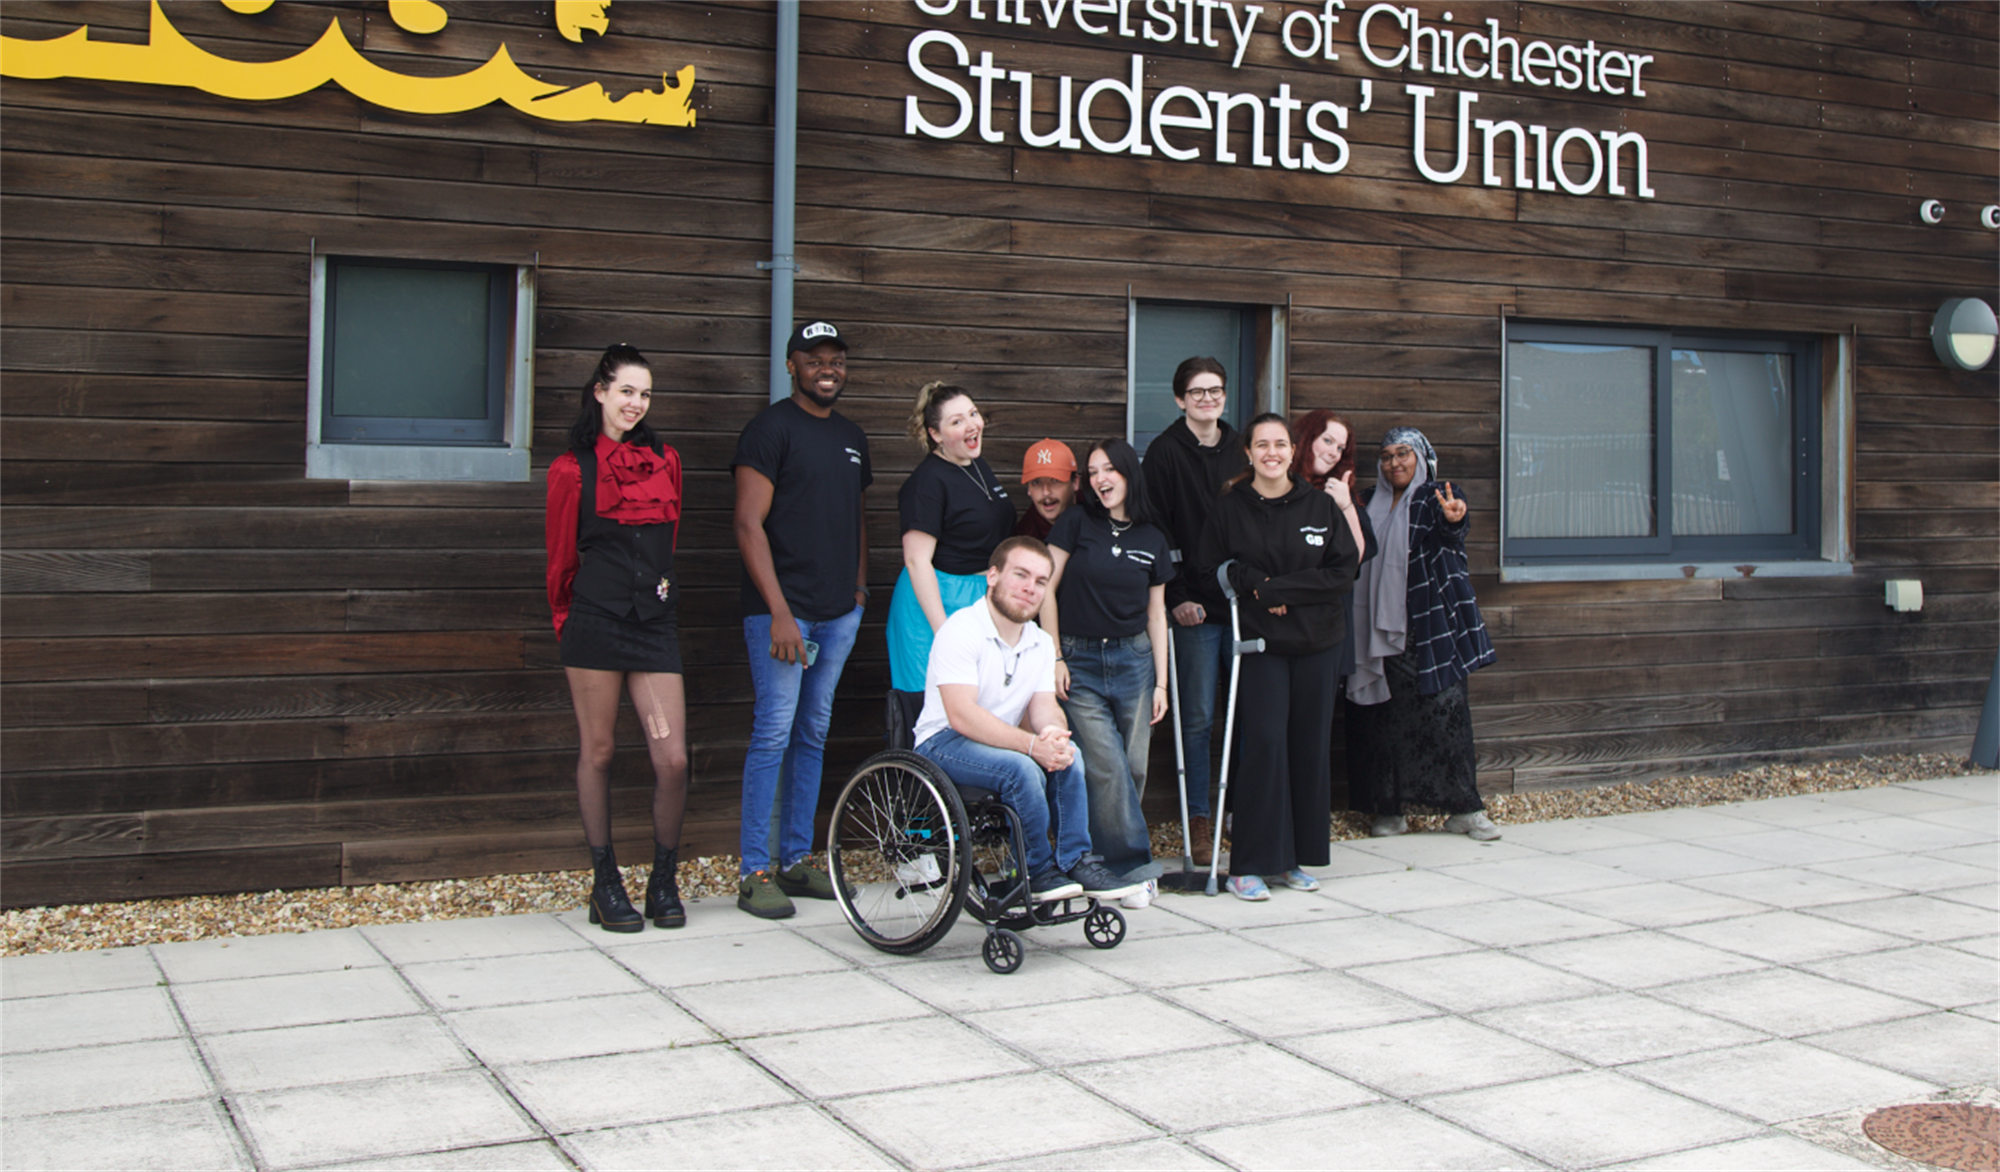 Part-time positions (voluntary) are completed alongside a students studies. They are a great way to develop skills and make a difference by helping to run the students' union and direct its work to support the whole diverse student body.